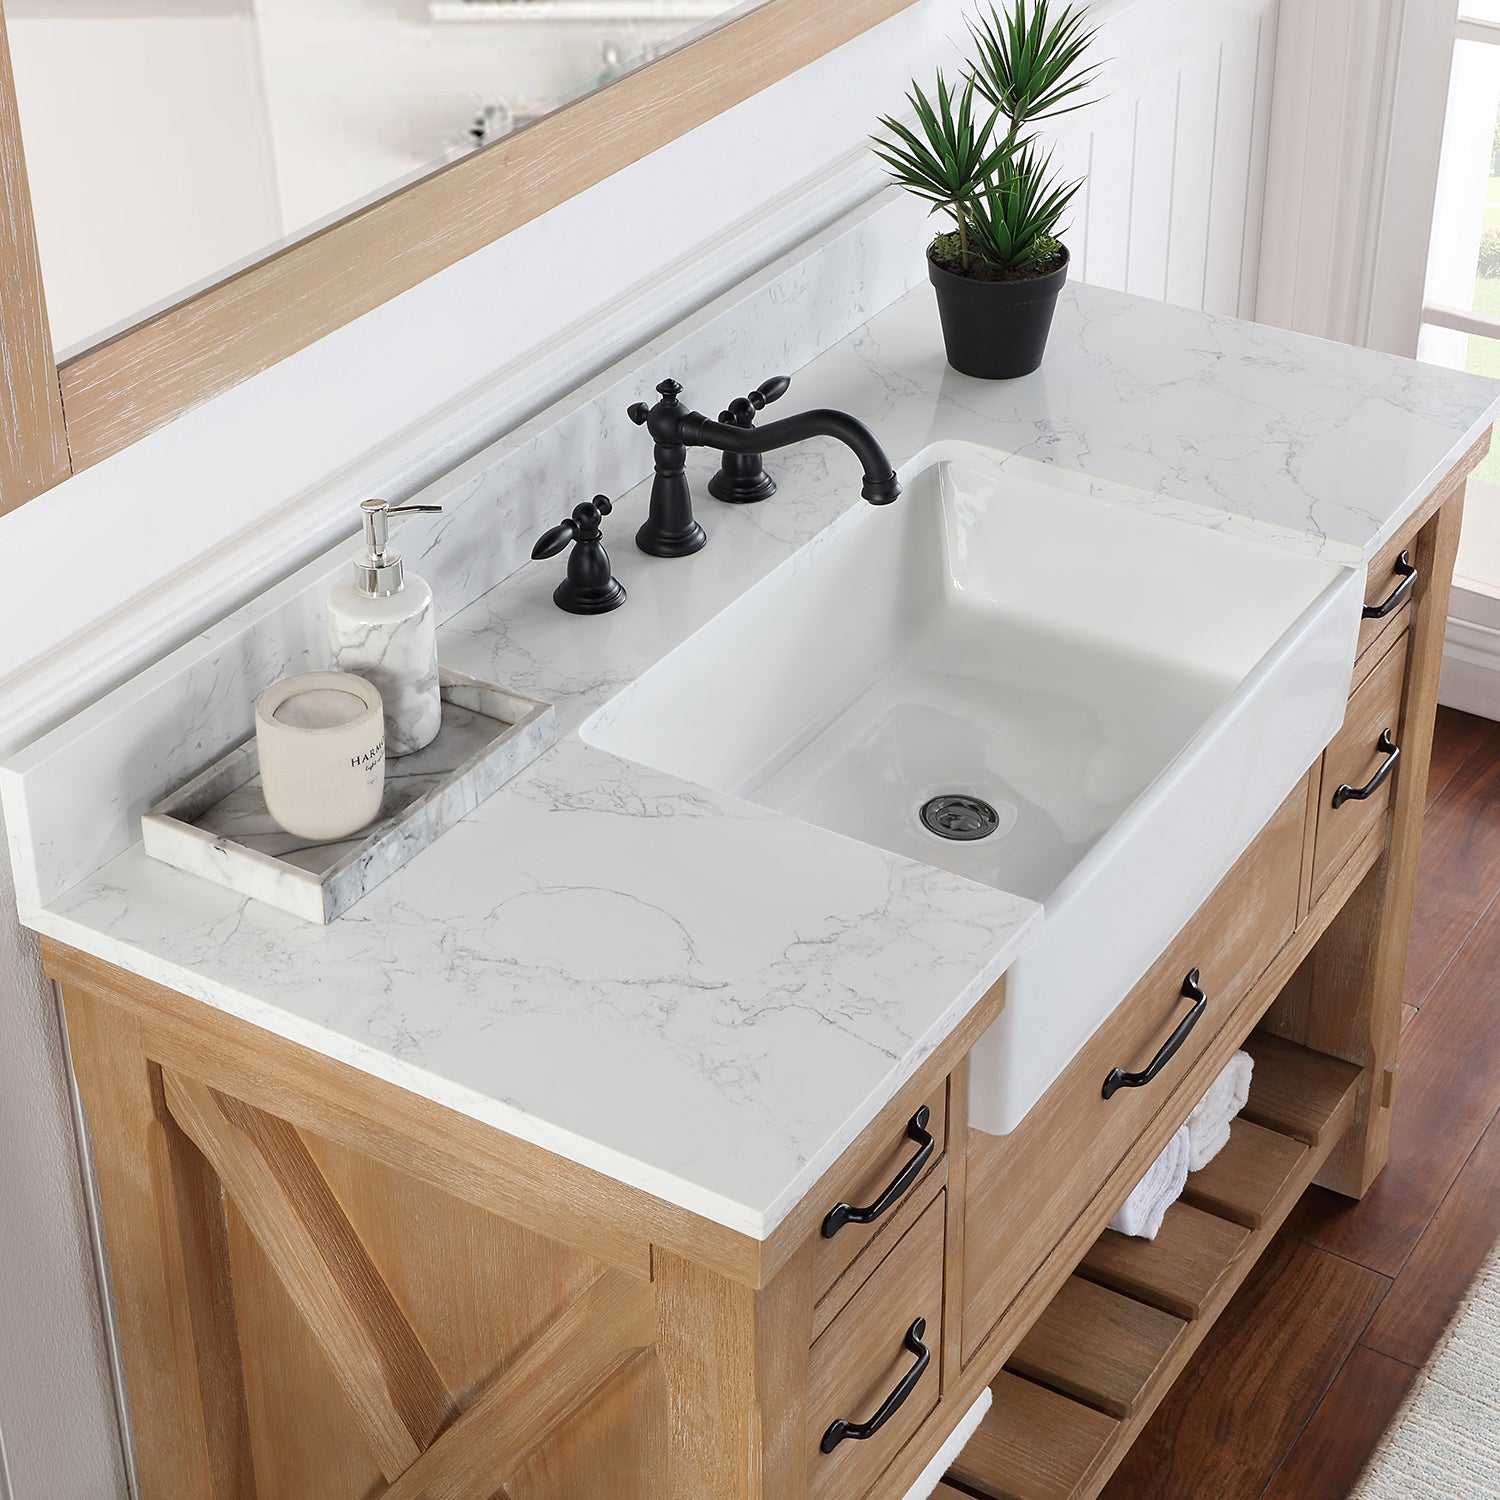 Villareal 48" Single Vanity in Weathered Pine with Composite Stone Top in White, White Farmhouse Basin